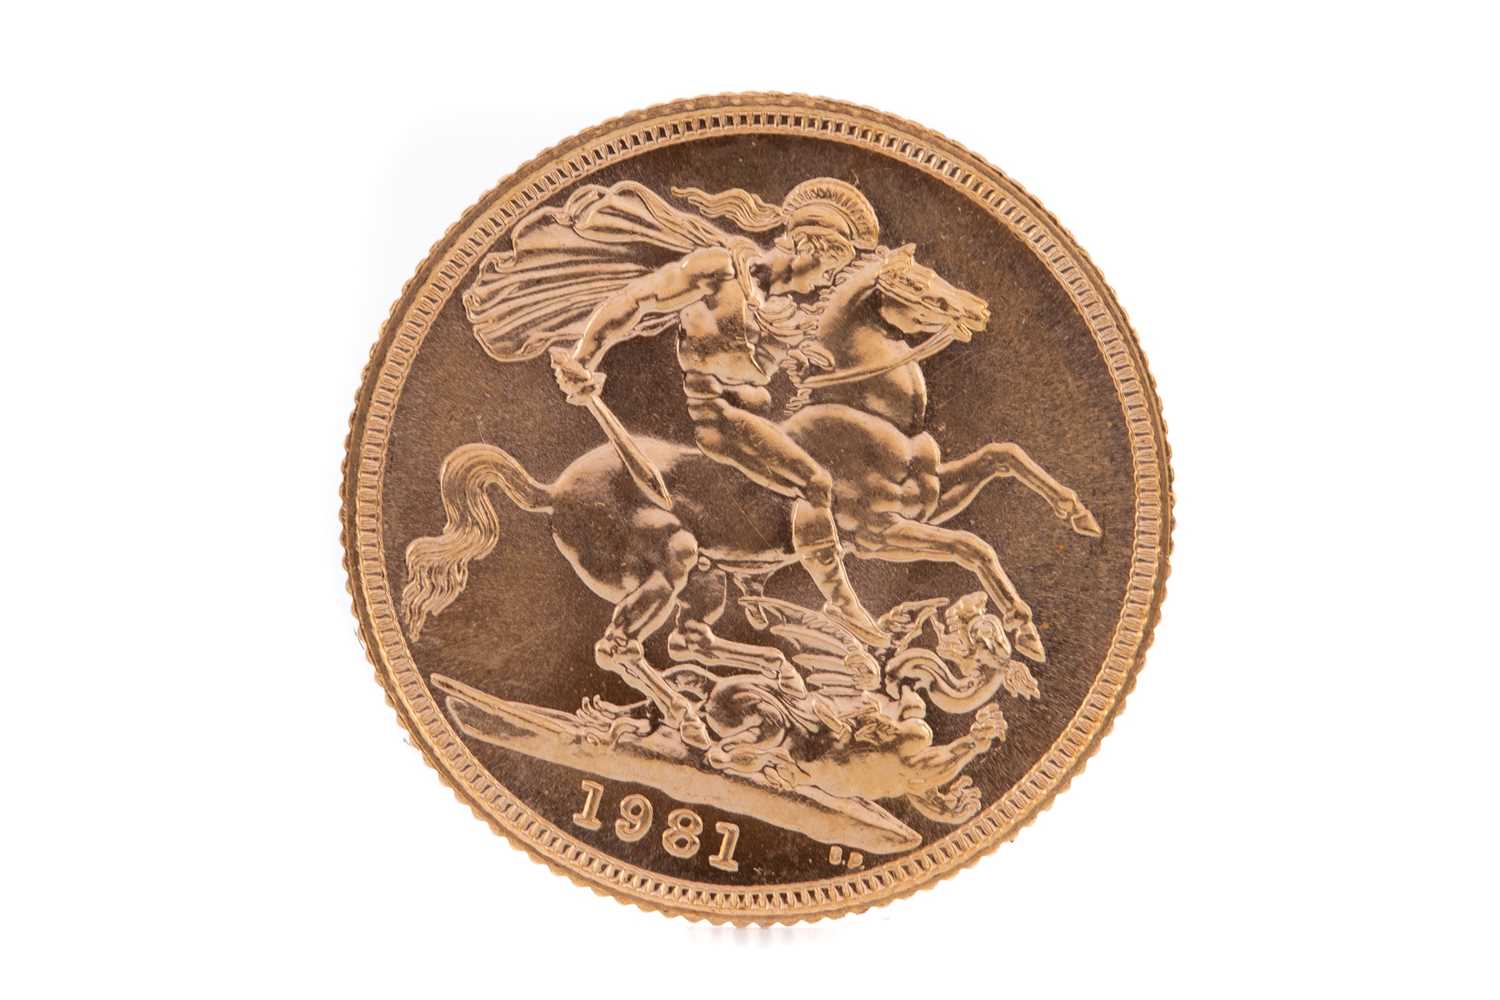 Lot 83 - AN ELIZABETH II GOLD SOVEREIGN DATED 1981